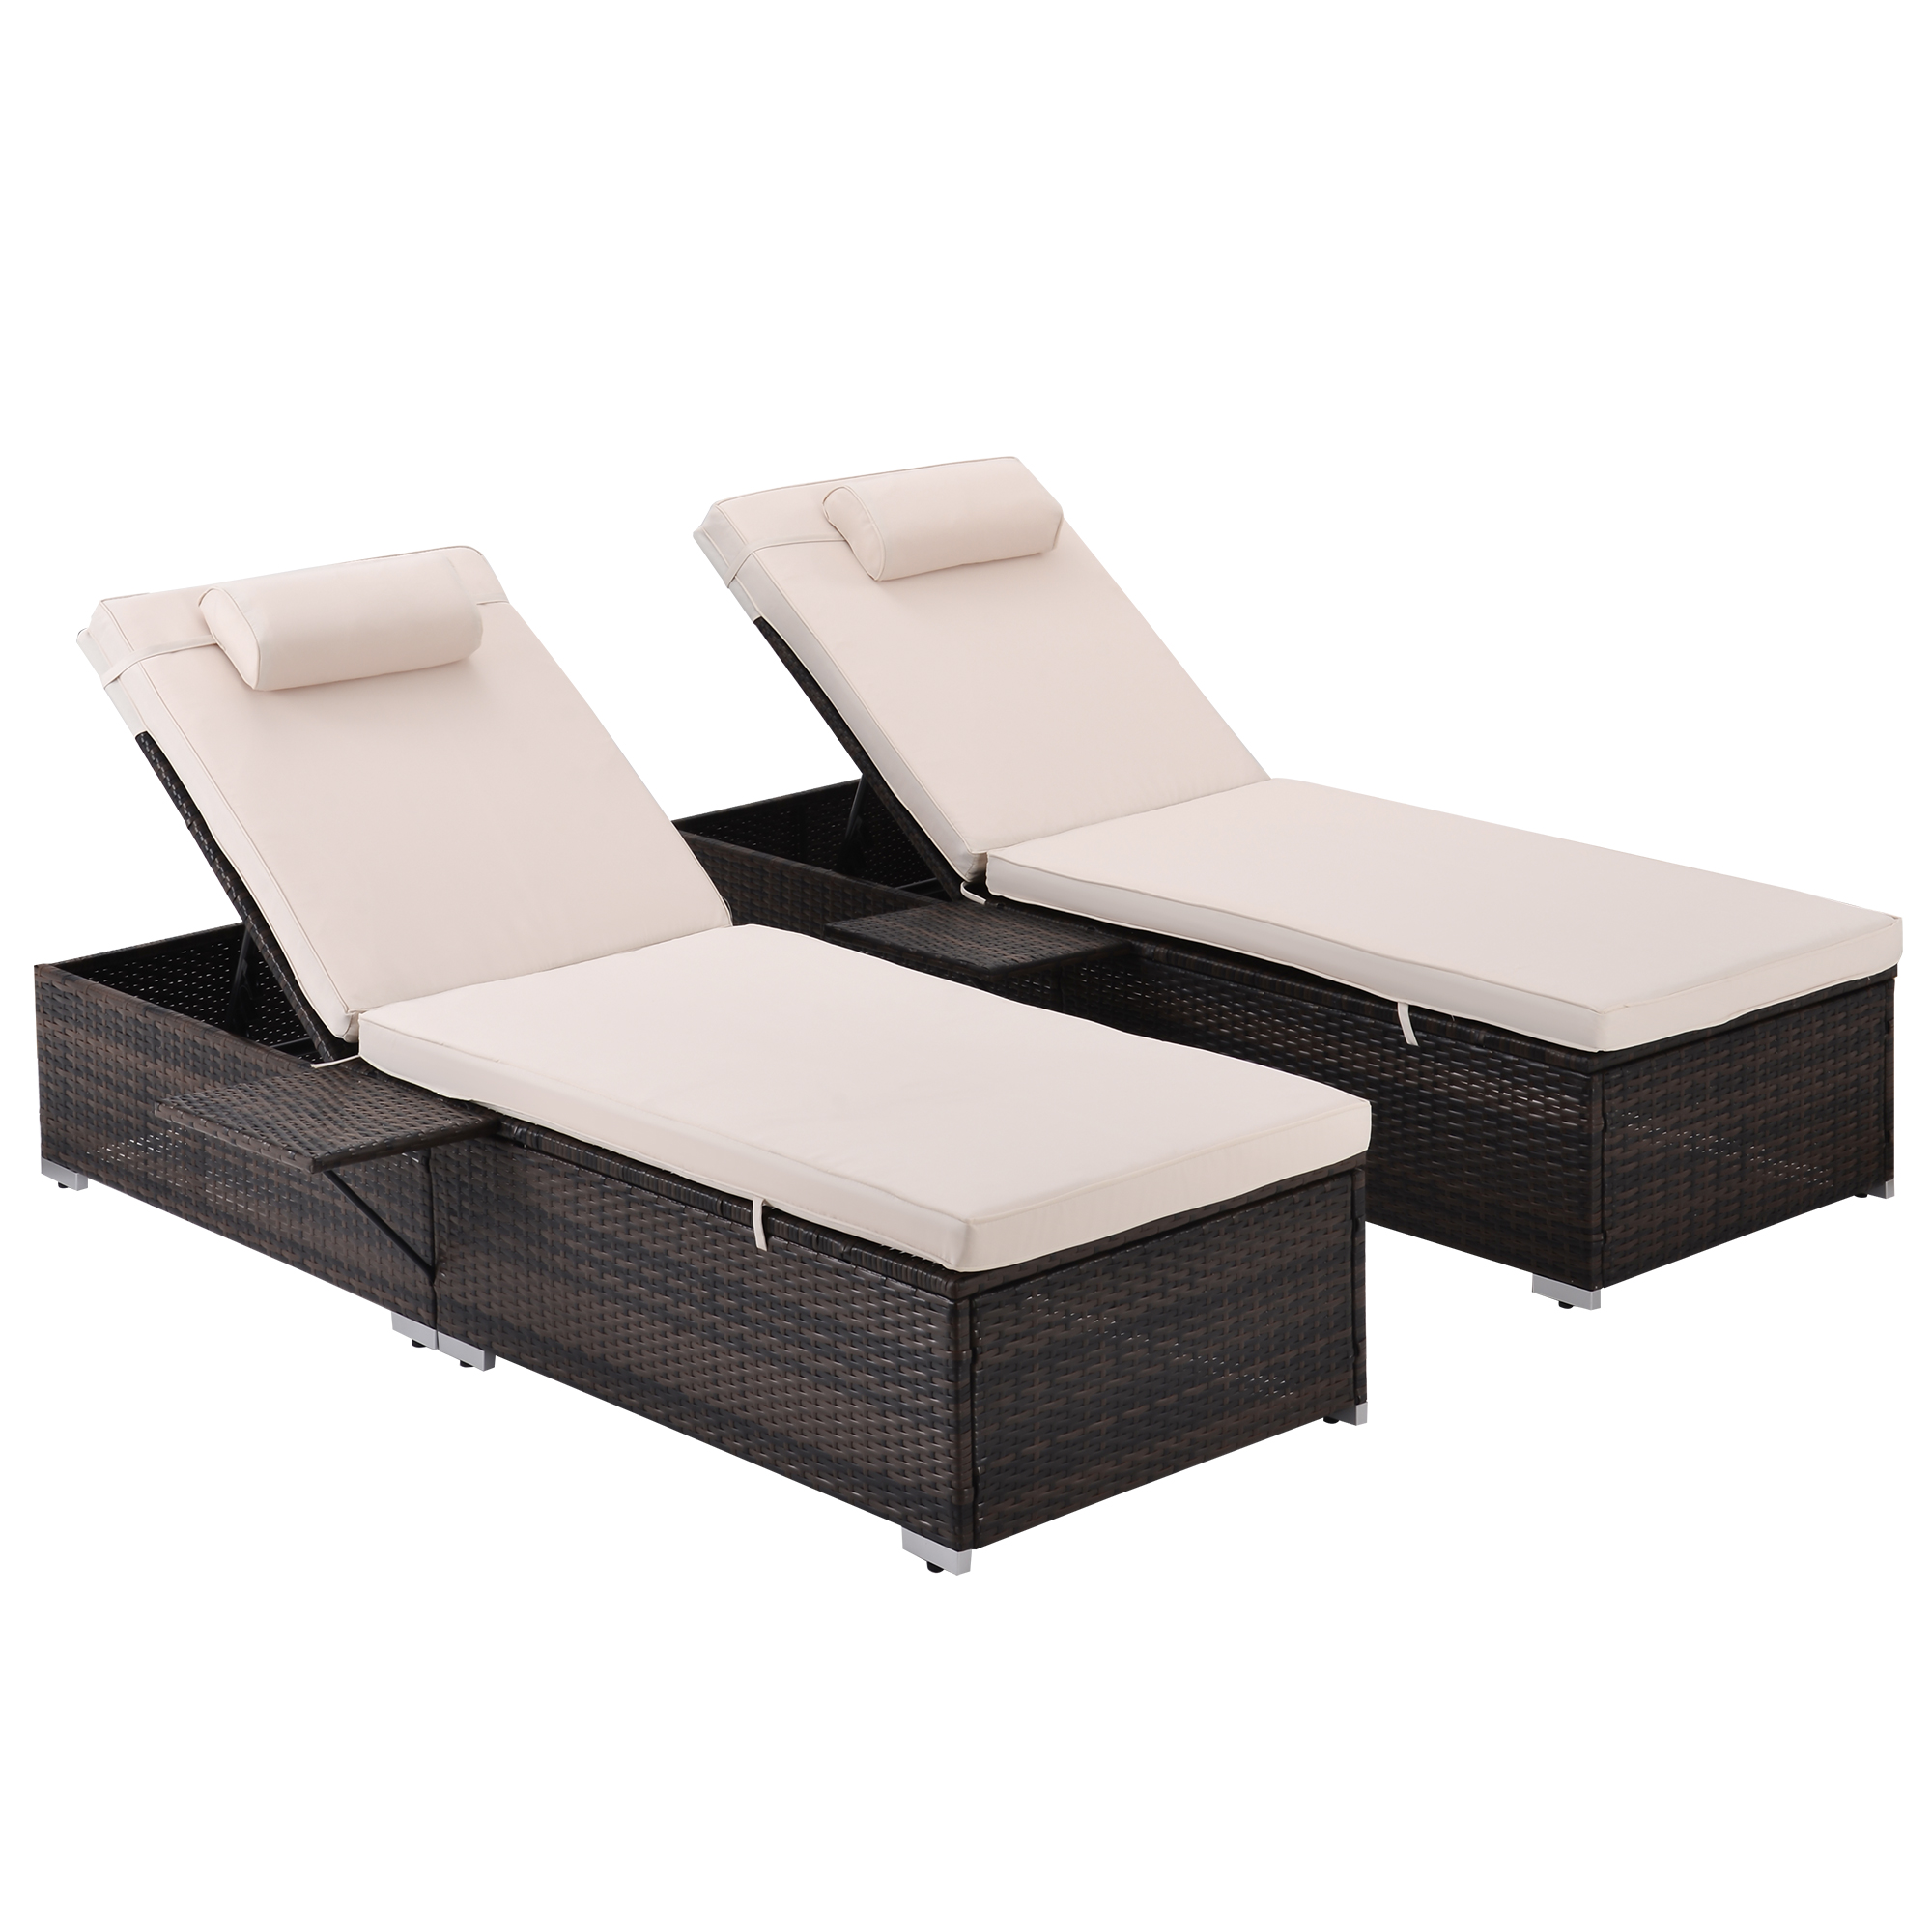 Outdoor Chaise Lounge Chairs, Patio Reclining Sun Lounger, Wicker Rattan Adjustable Lounge Chair with Side Table, Comfort Head Pillow, Reclining Chair for Poolside, Deck, Backyard, 2 Pack, Beige - image 5 of 10